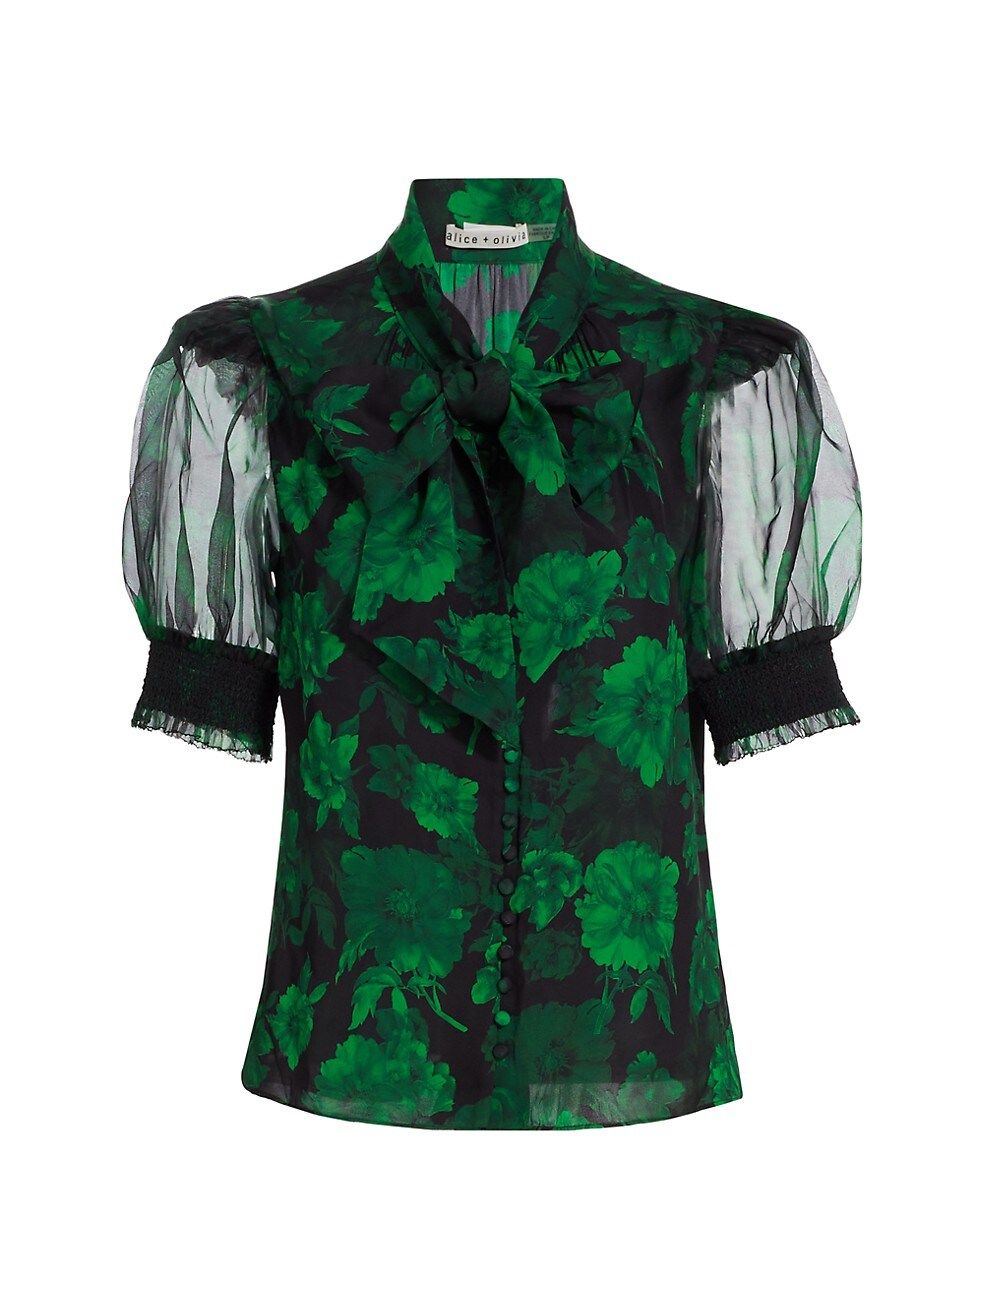 Alice + Olivia


Brentley Floral Puff-Sleeve Blouse



4.3 out of 5 Customer Rating | Saks Fifth Avenue